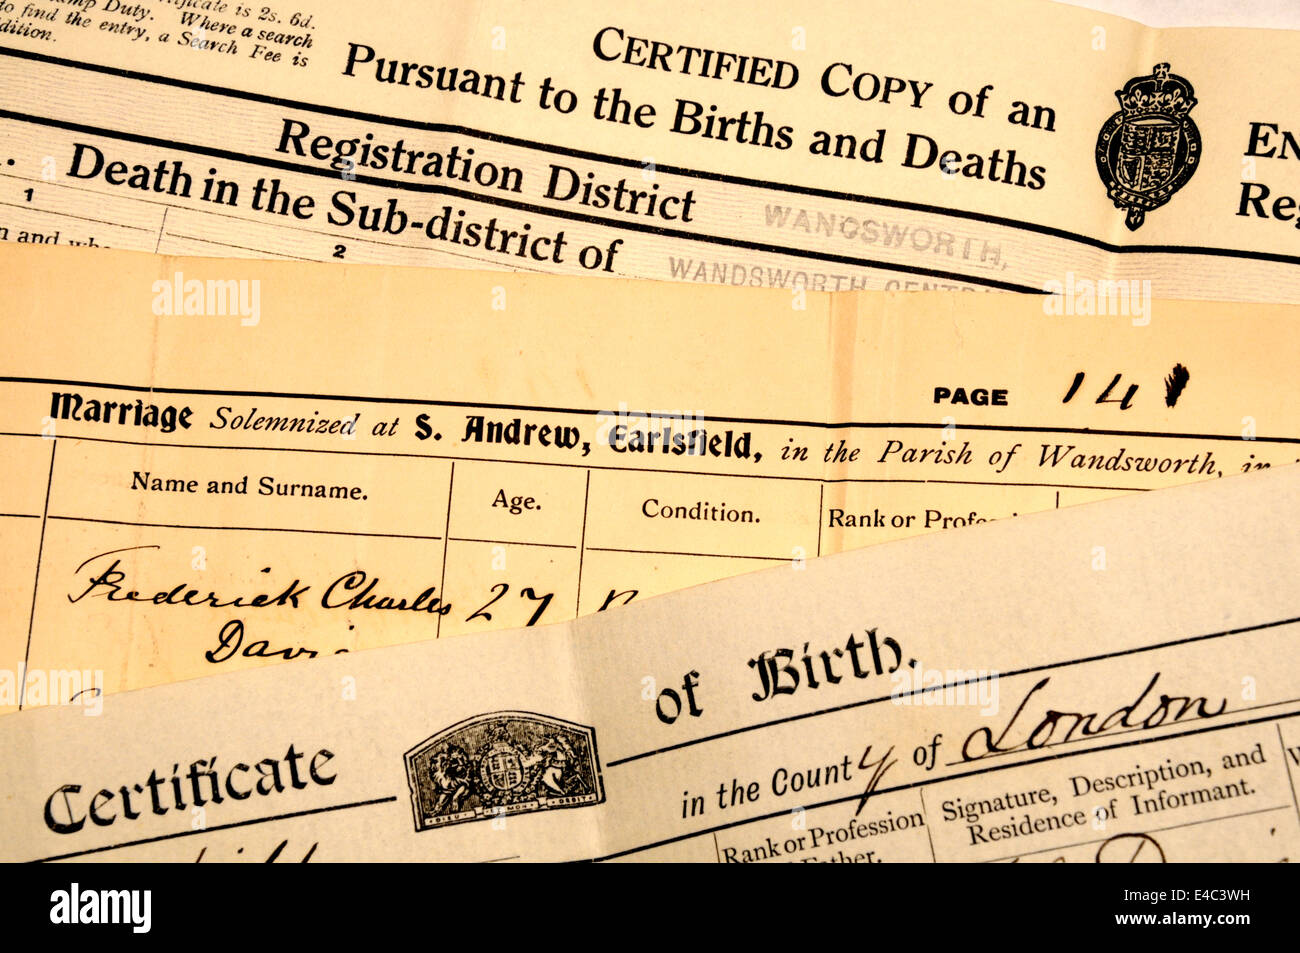 Certified copies of Birth, Marriage and Death registers Stock Photo